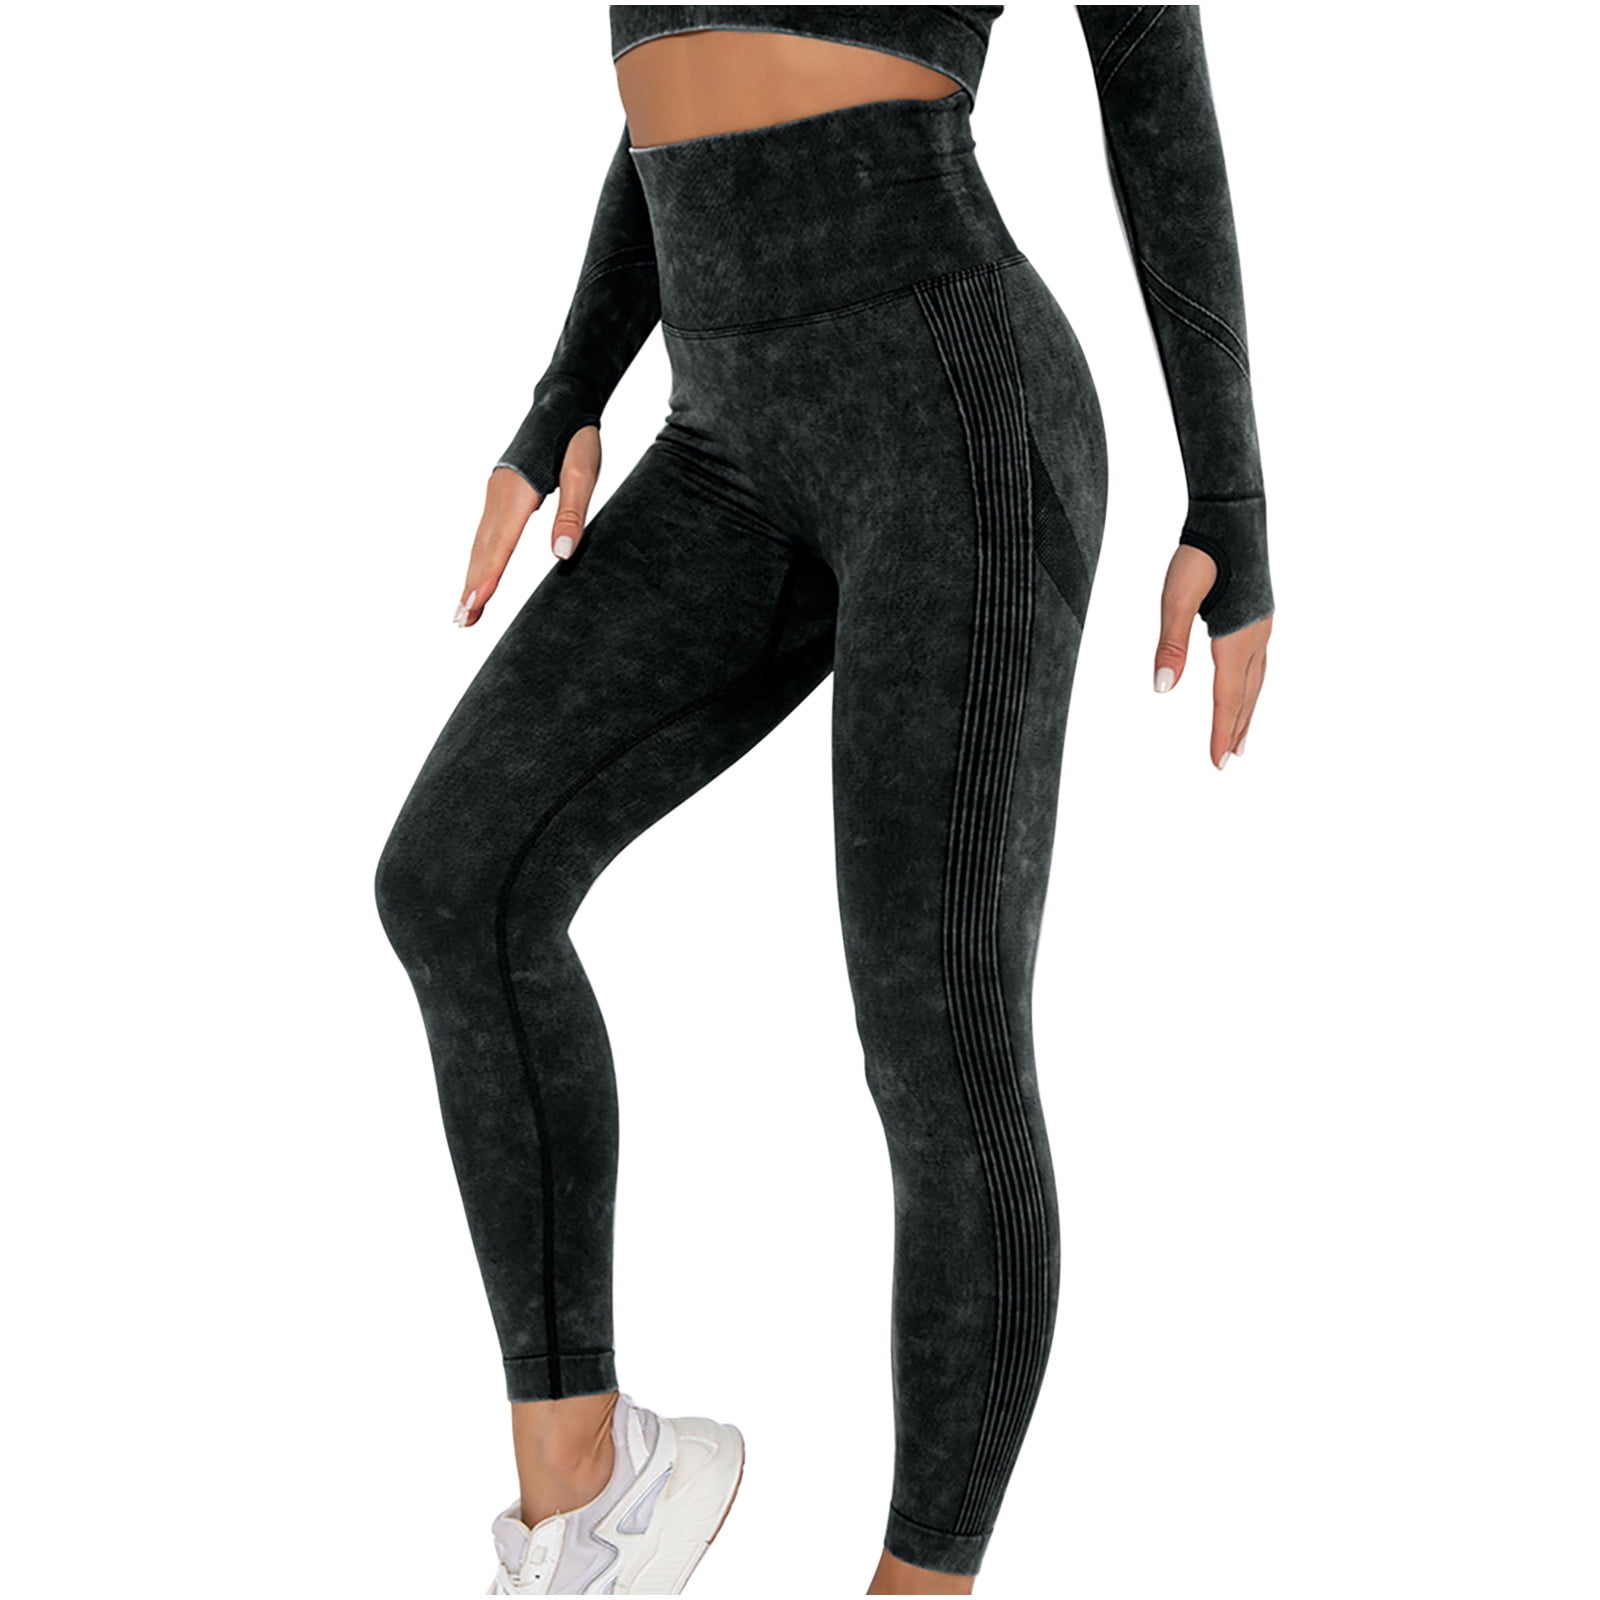 Jalioing Women's Sport Gym Leggings Solid Color High Waist